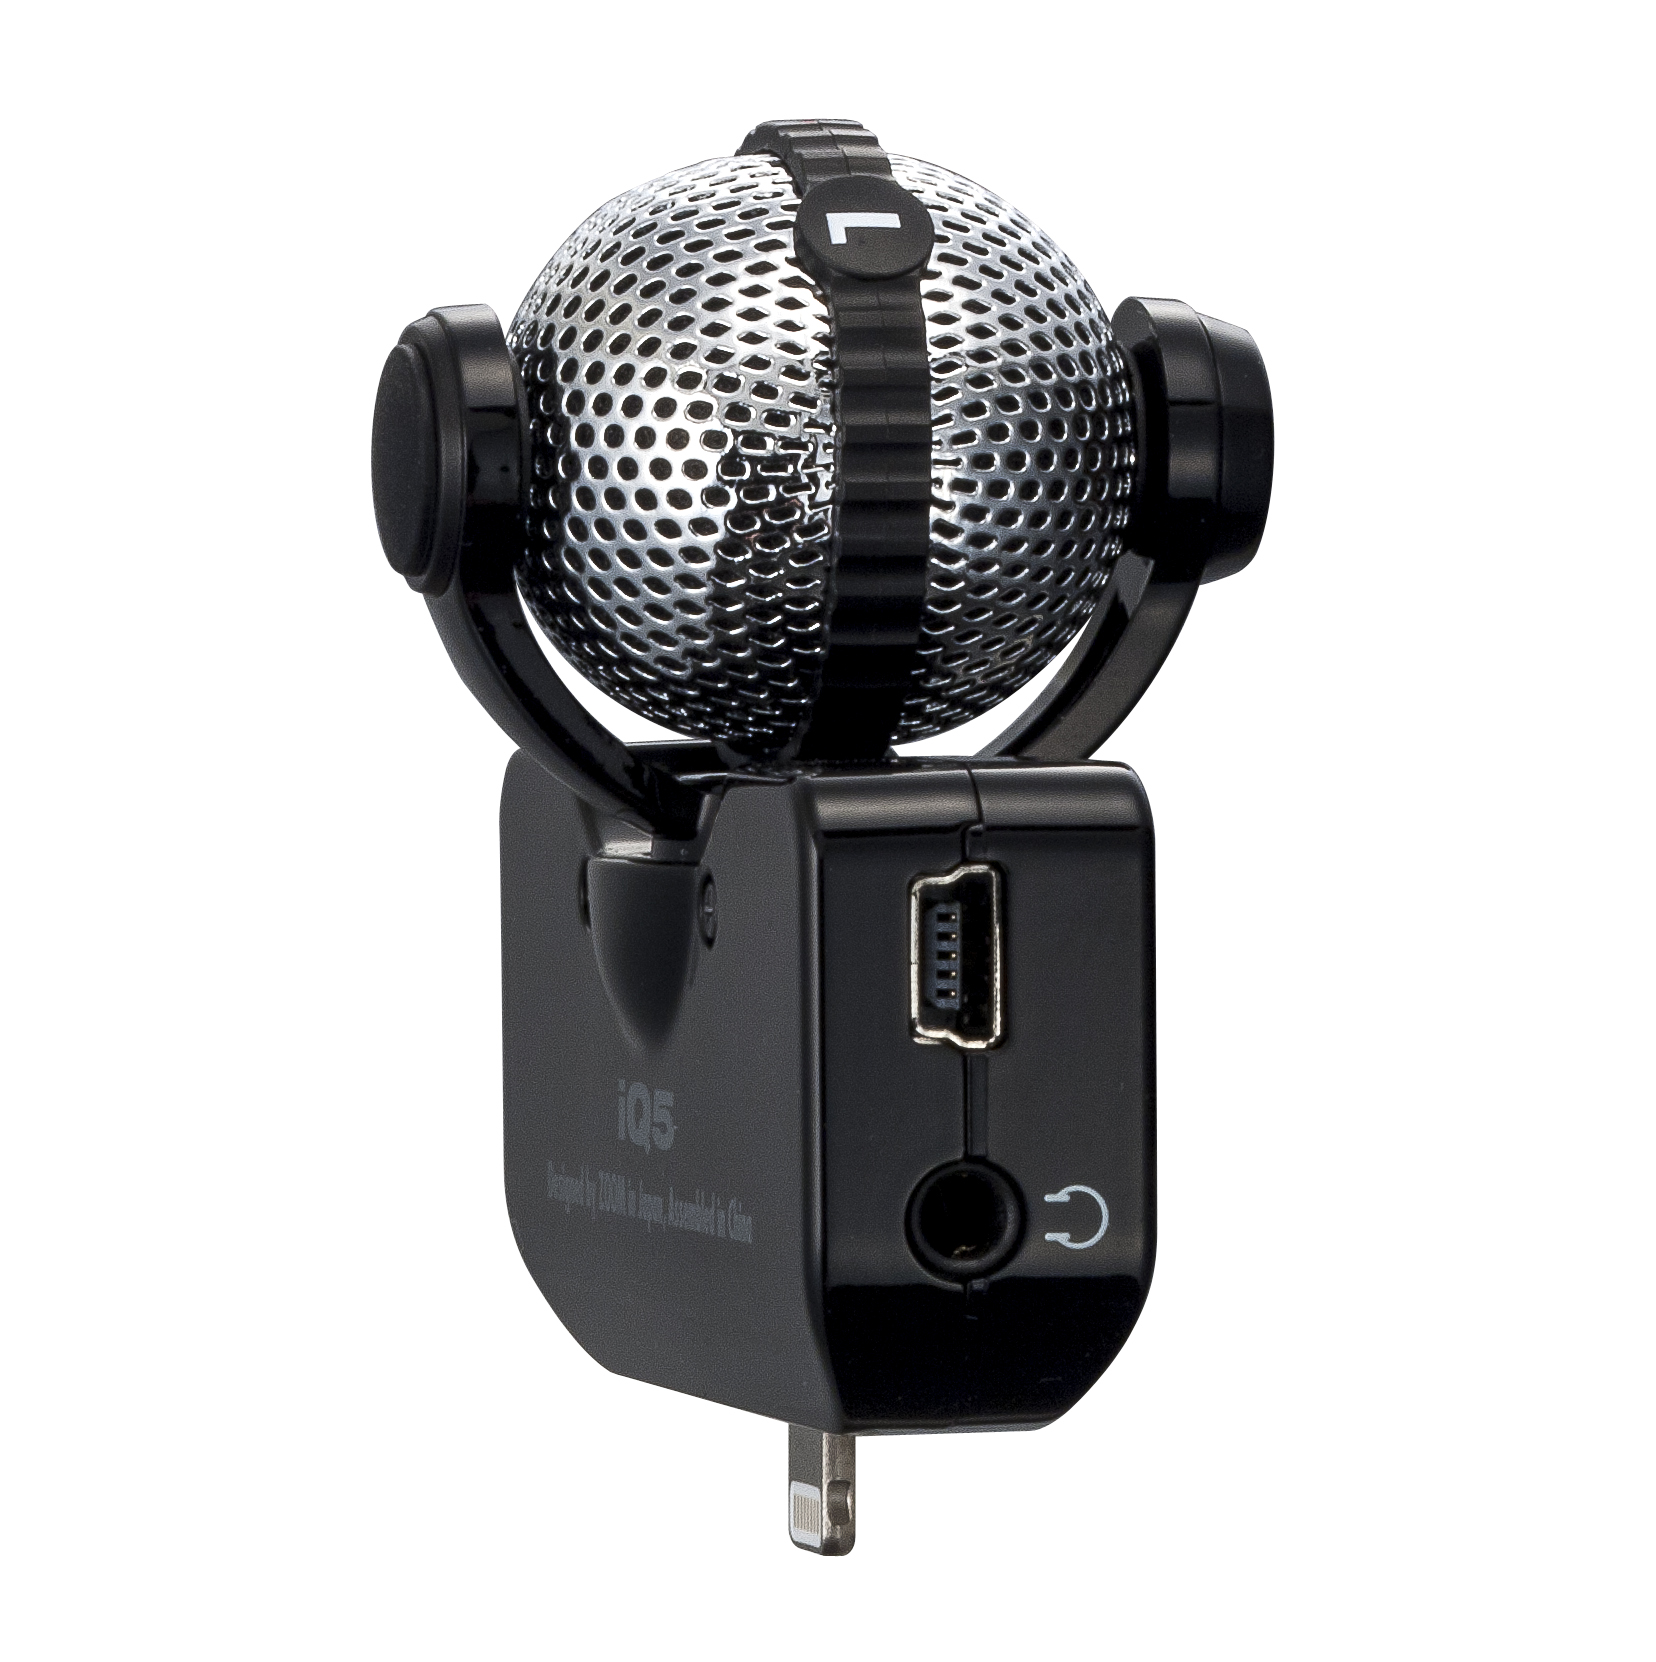 Iq5 Ms Stereo Microphone For Ios Zoom